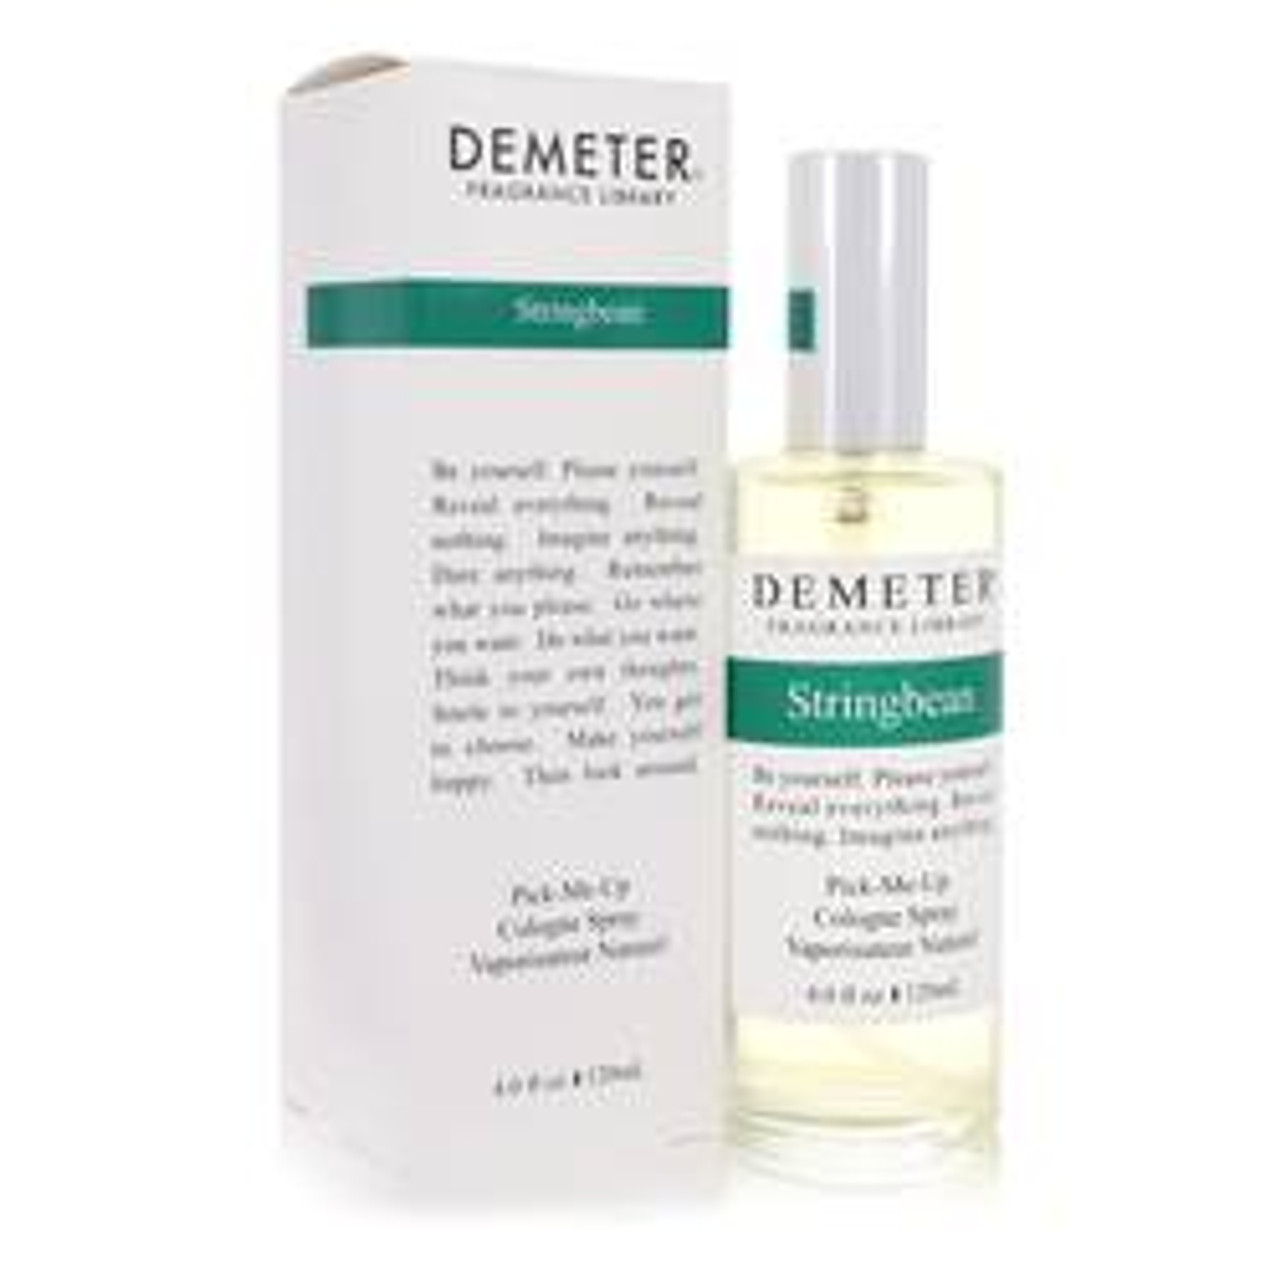 Demeter String Bean Perfume By Demeter Cologne Spray (Unisex) 4 oz for Women - [From 79.50 - Choose pk Qty ] - *Ships from Miami